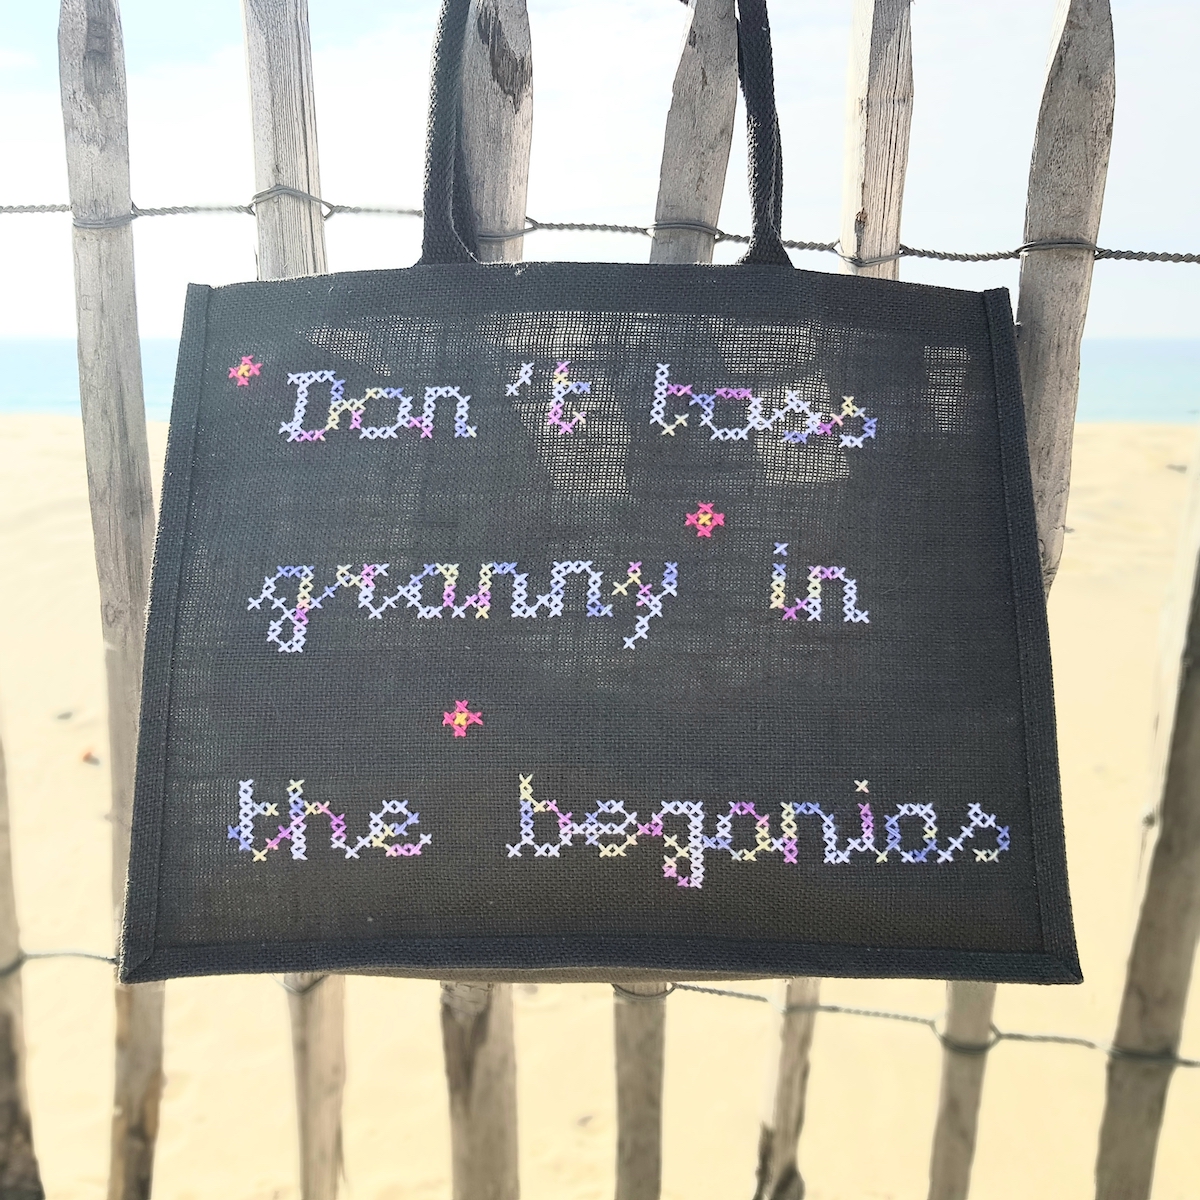 cabas de plage gris anthracite "Don't toss granny in the begonias" by Broc Into The Moon